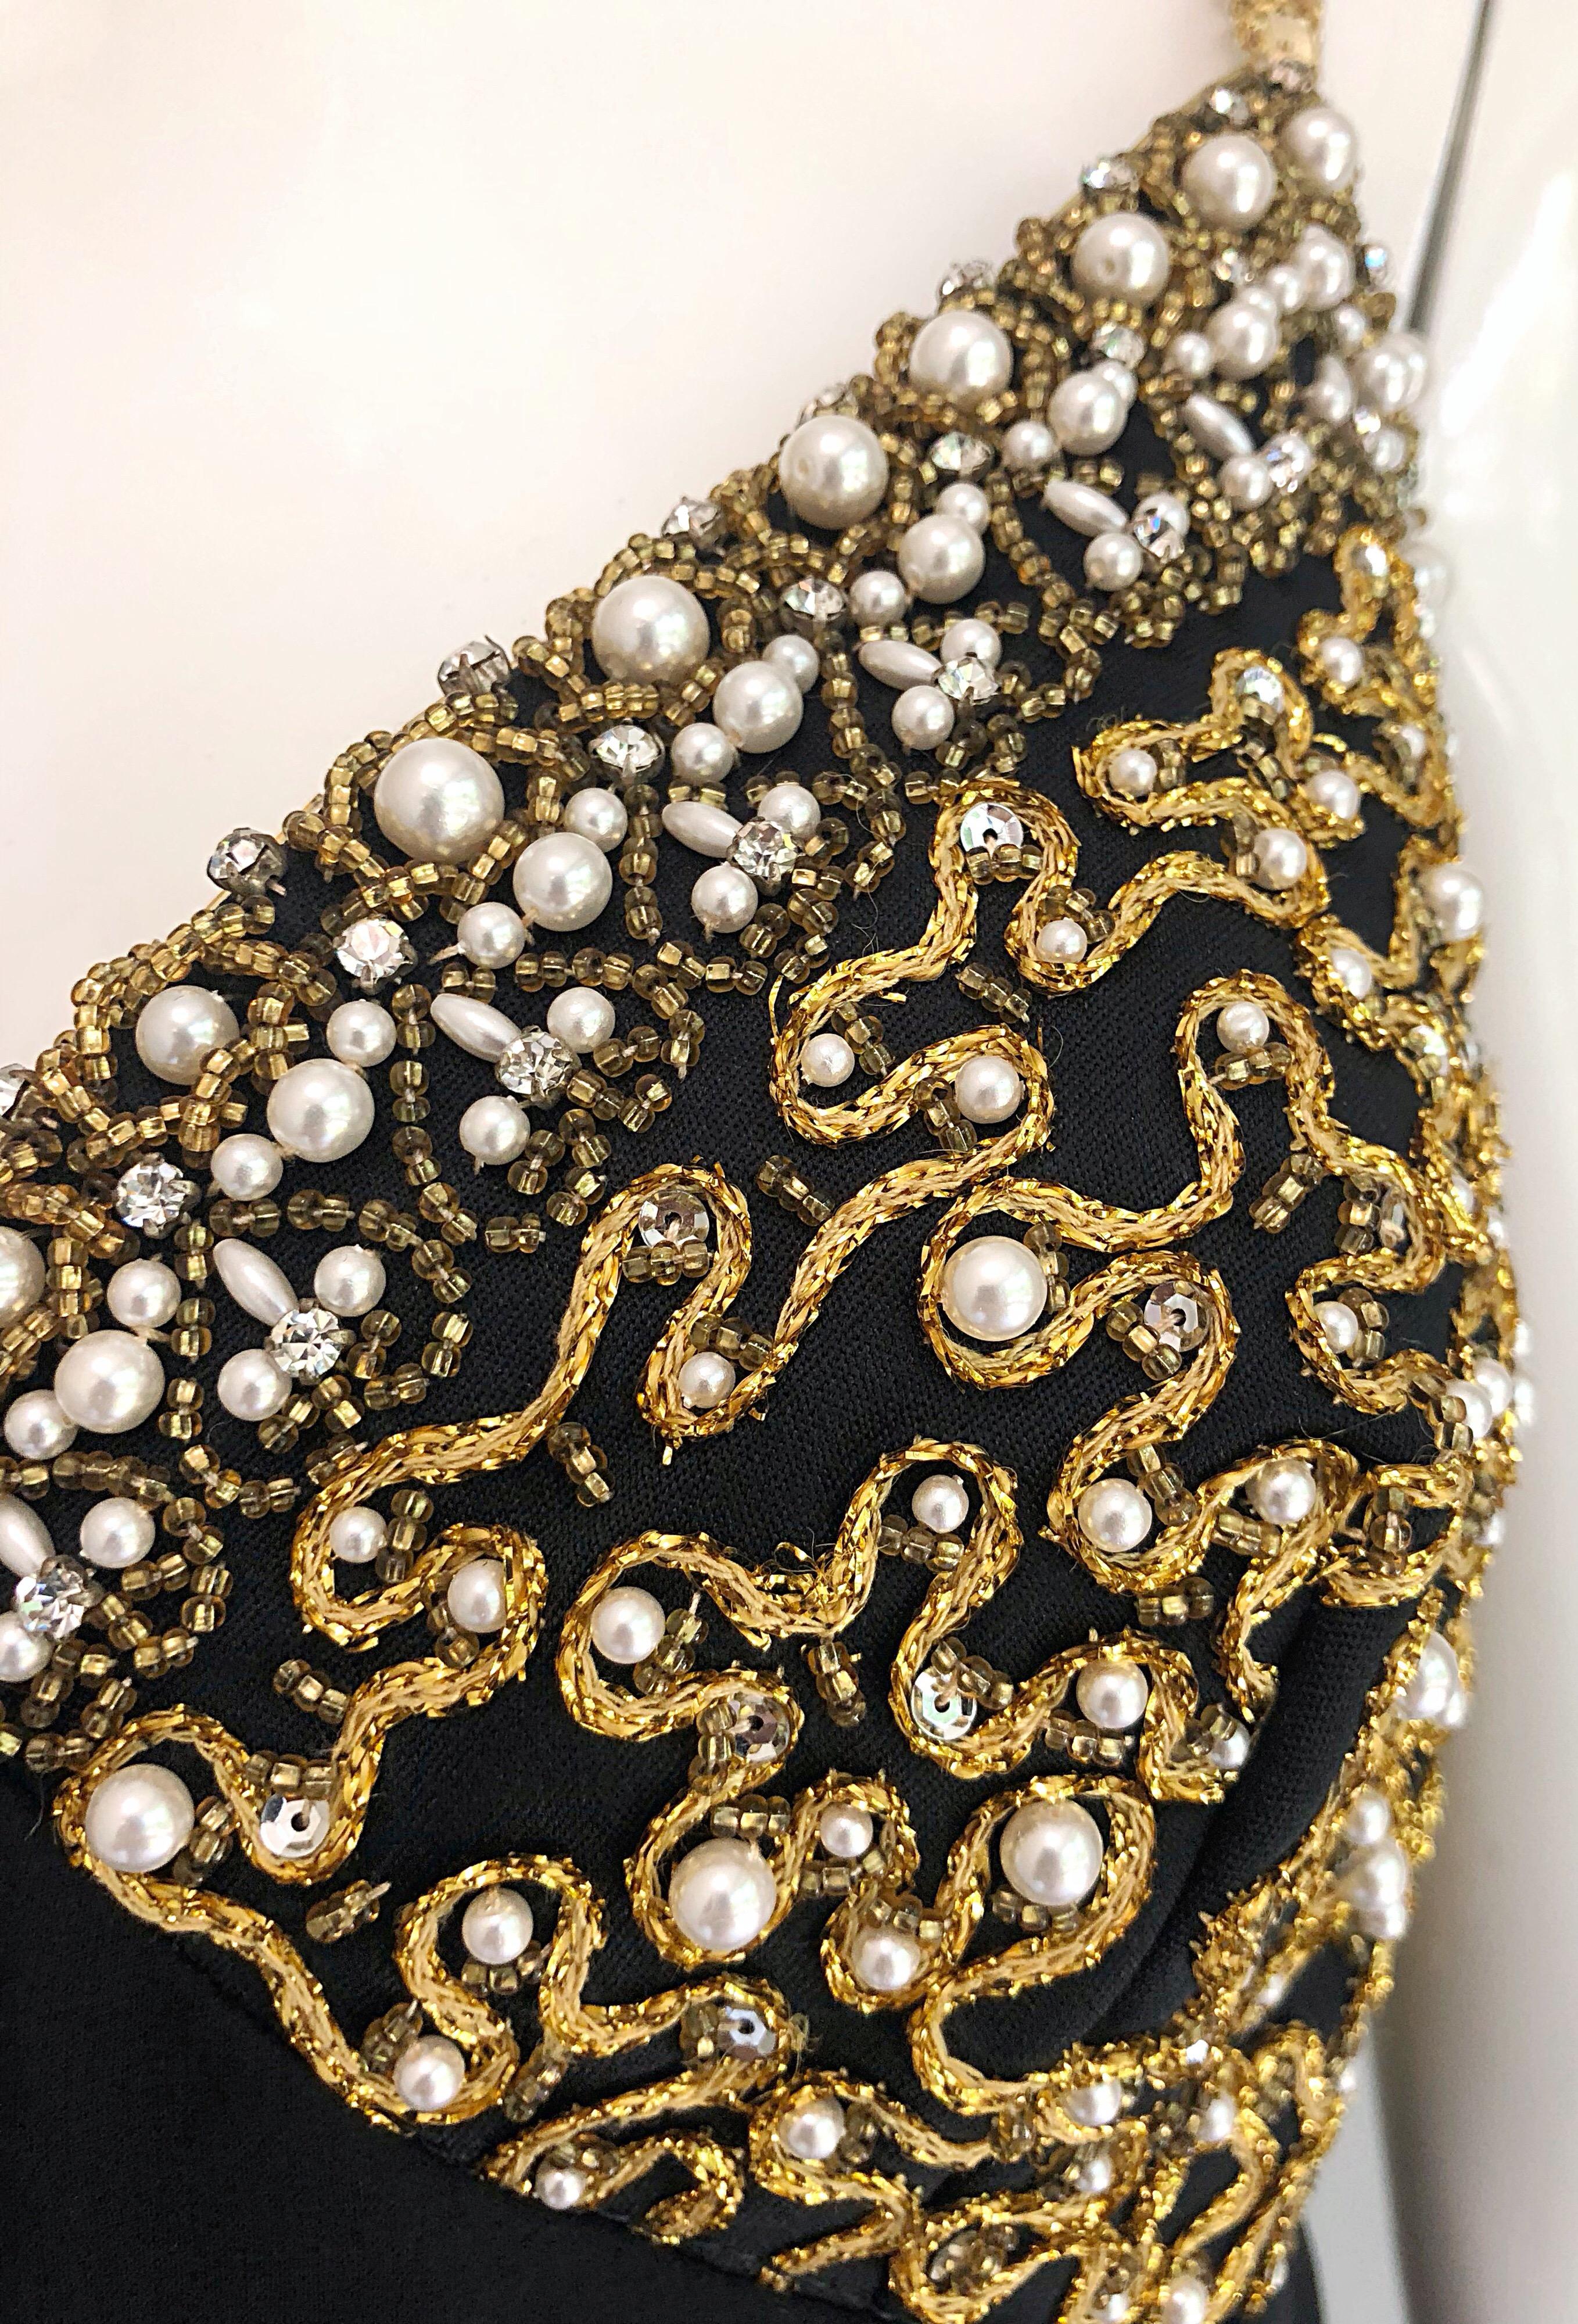 1970s Black + Gold Pearl + Rhinestone Encrusted Vintage 70s Chiffon Evening Gown For Sale 4